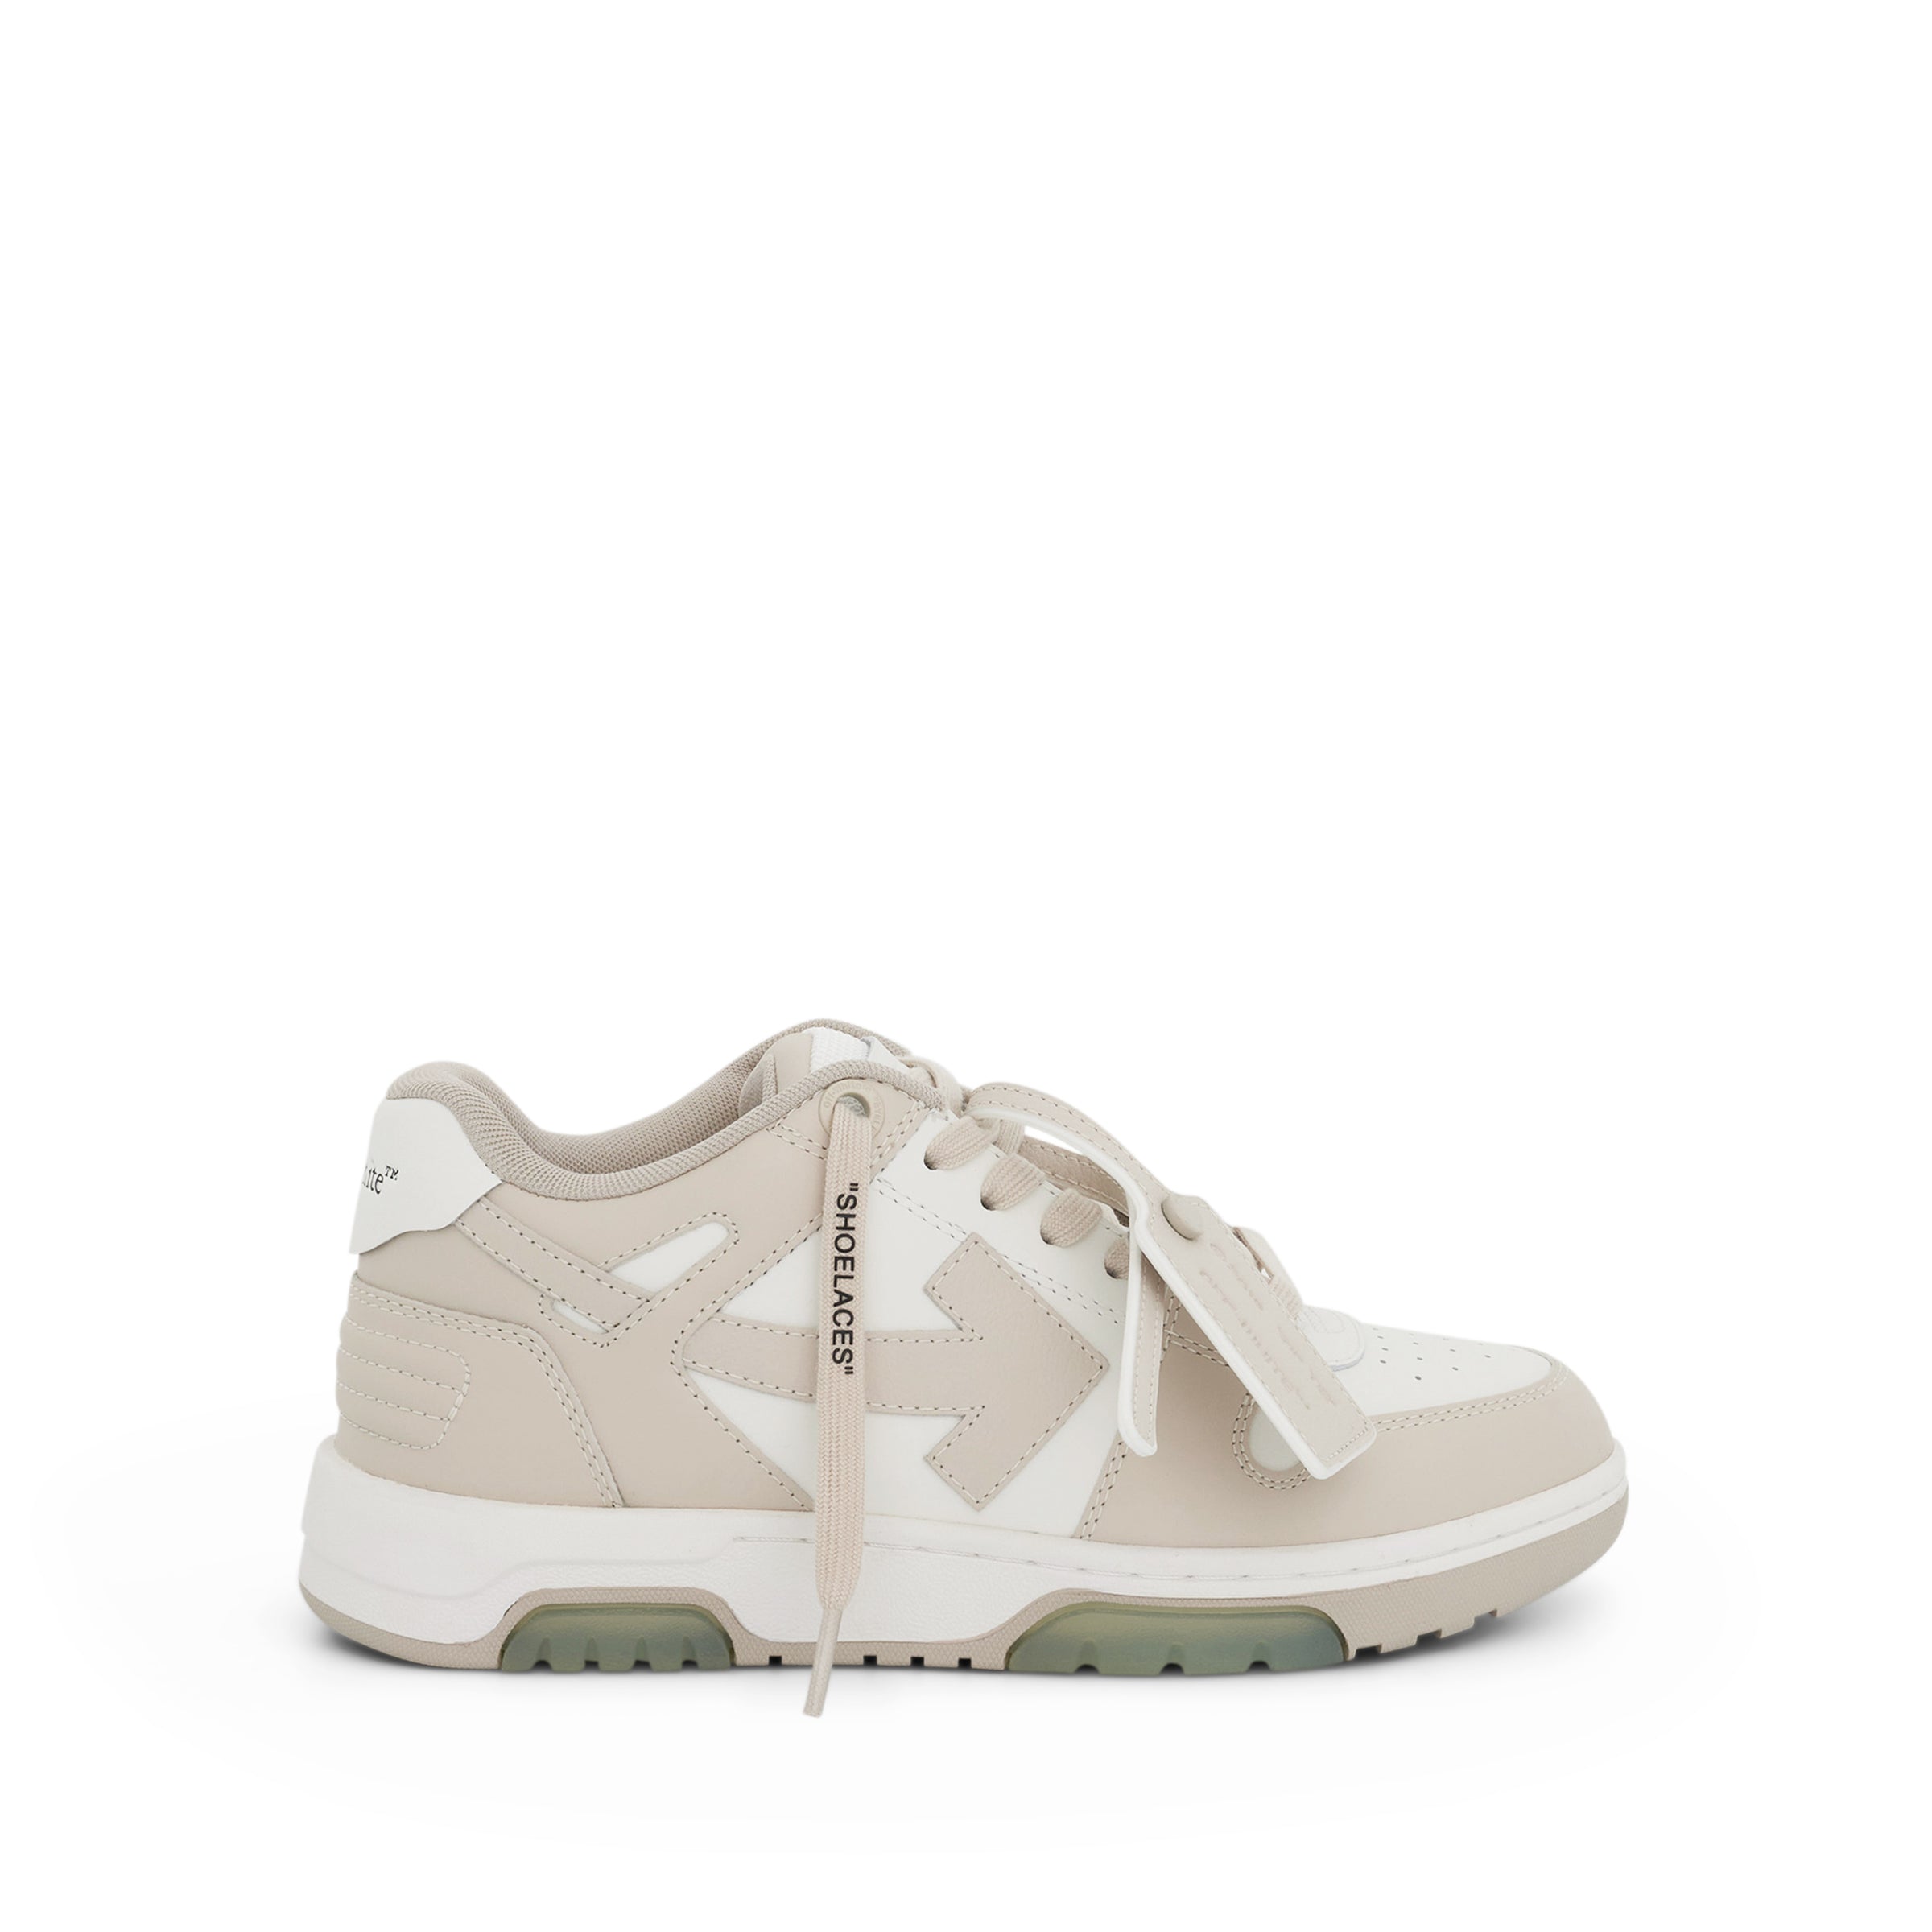 OFF-WHITE Out of Office Calf Leather Sneakers in White/Beige